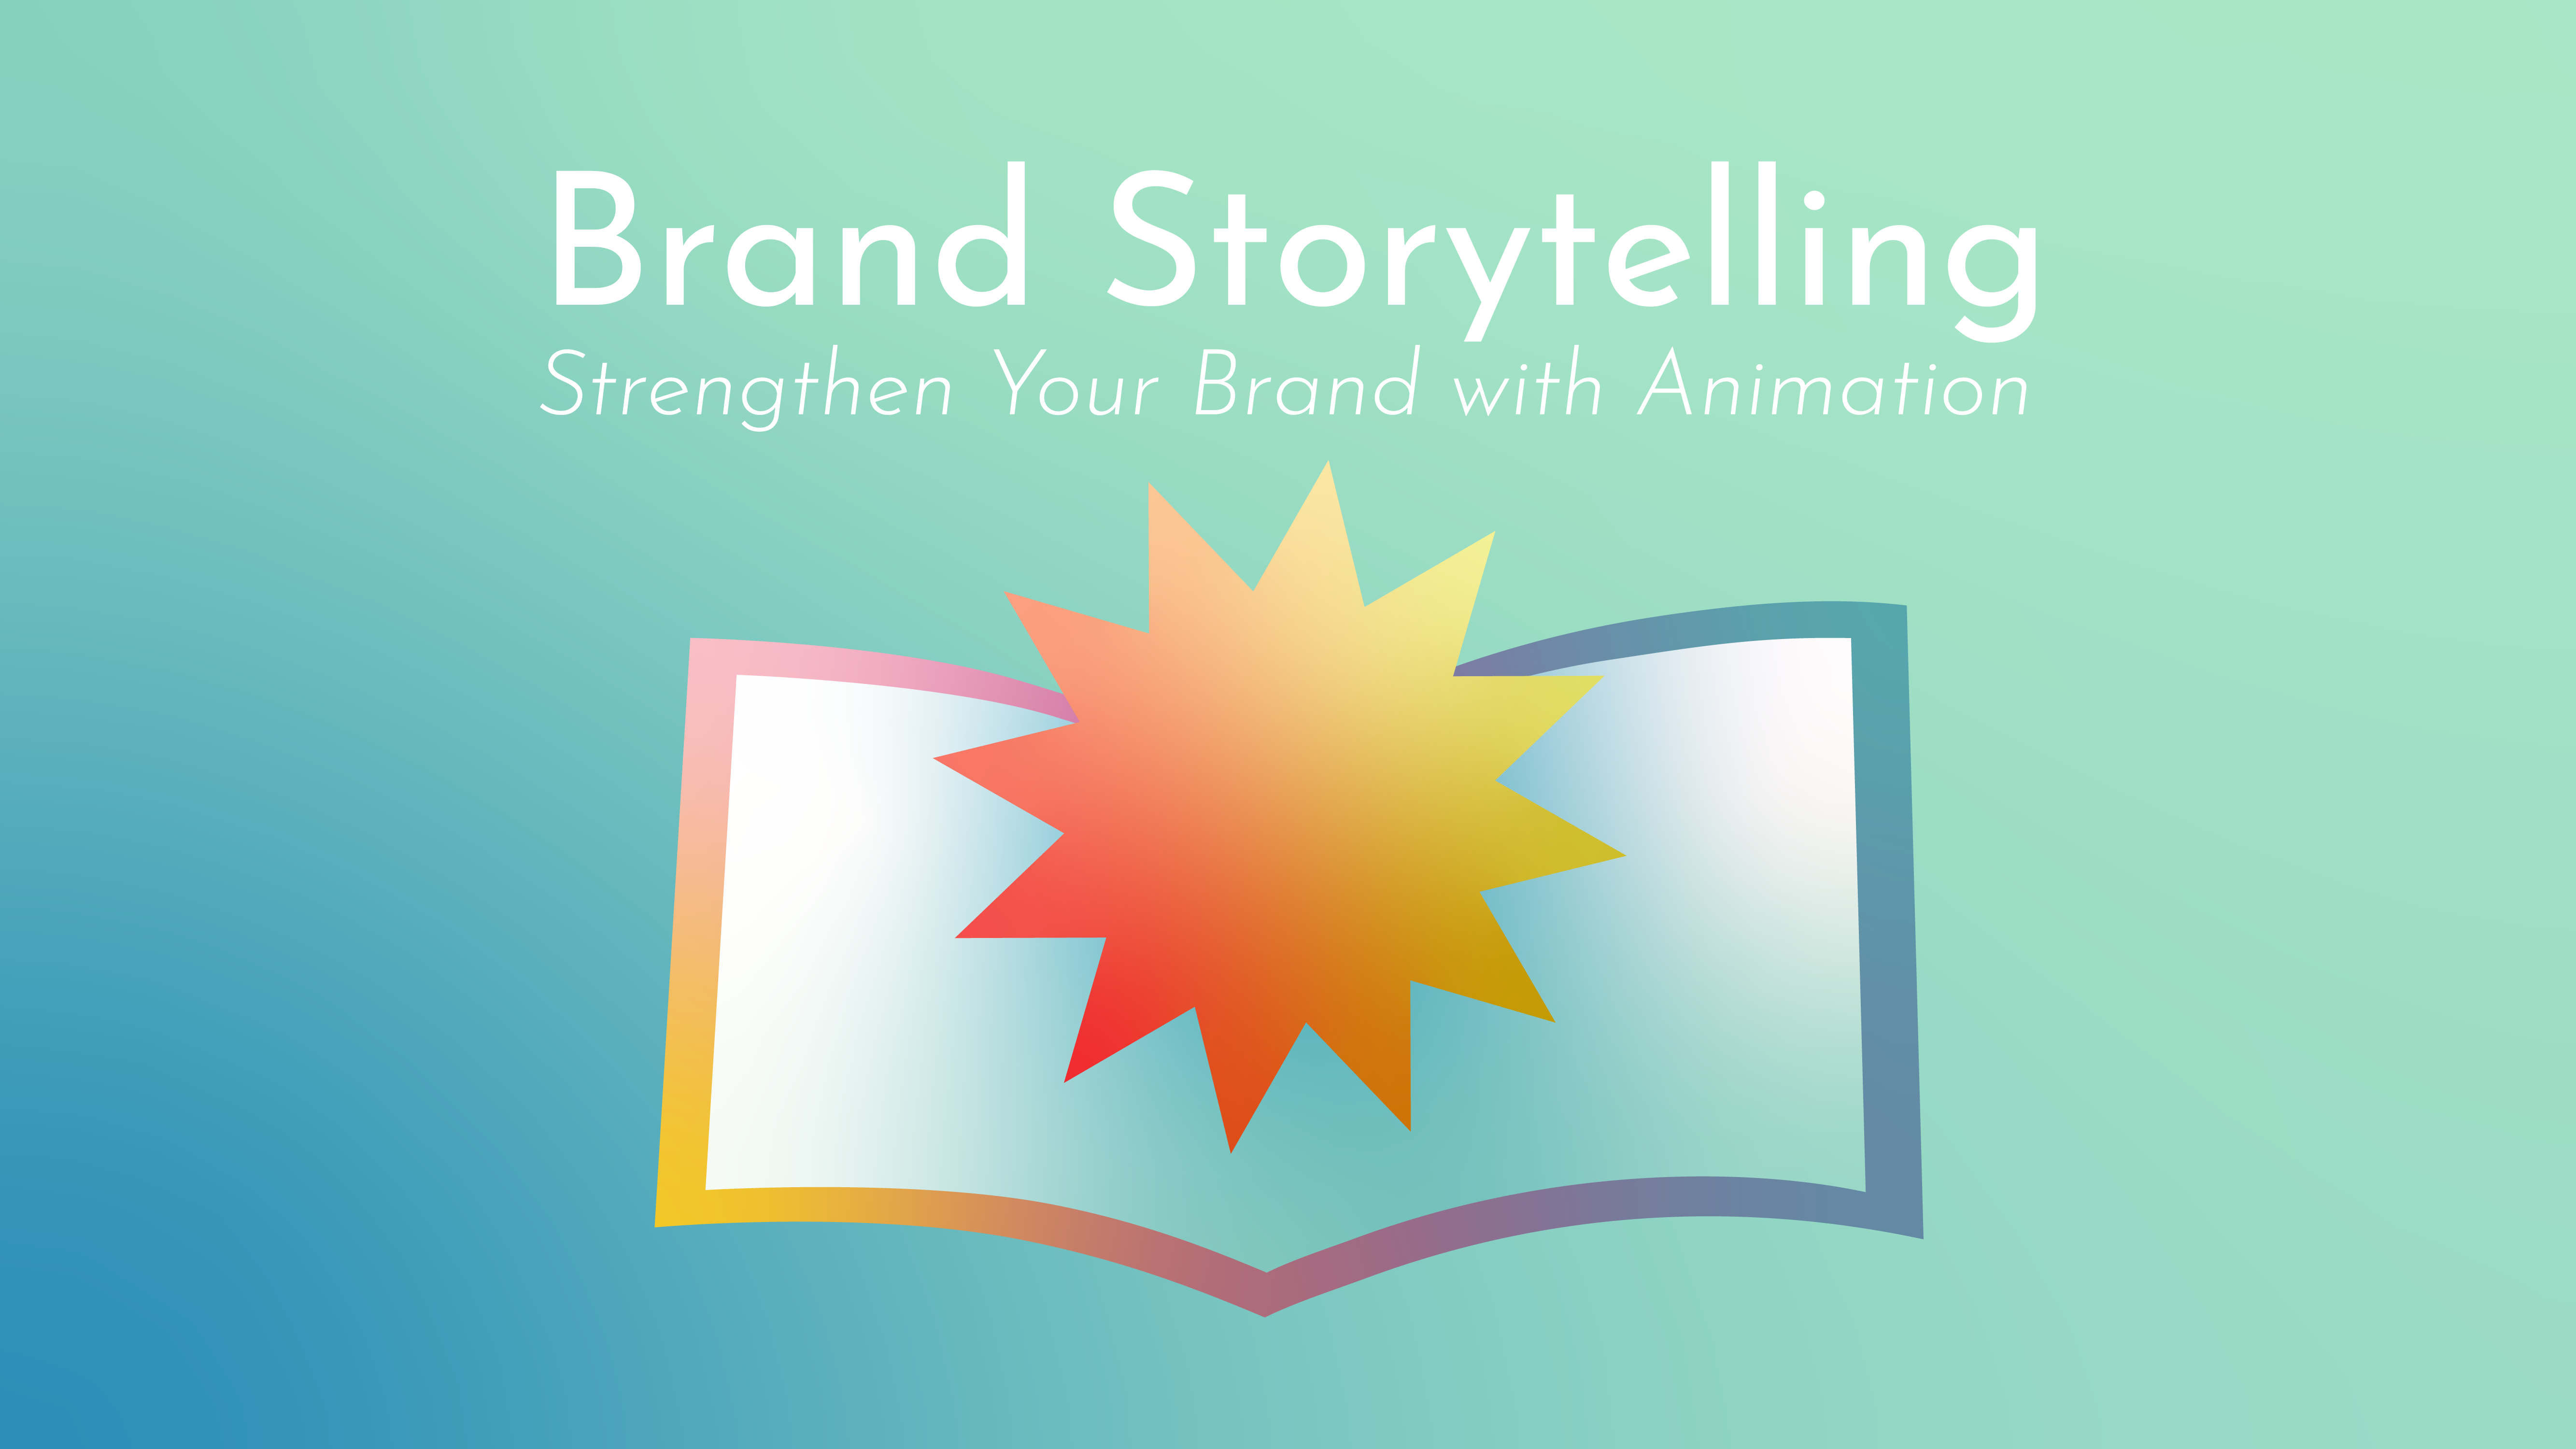 A book is open to it's center, where a burst of light emits - title reads 'Brand Storytelling: Strengthen Your Brand With Animation"